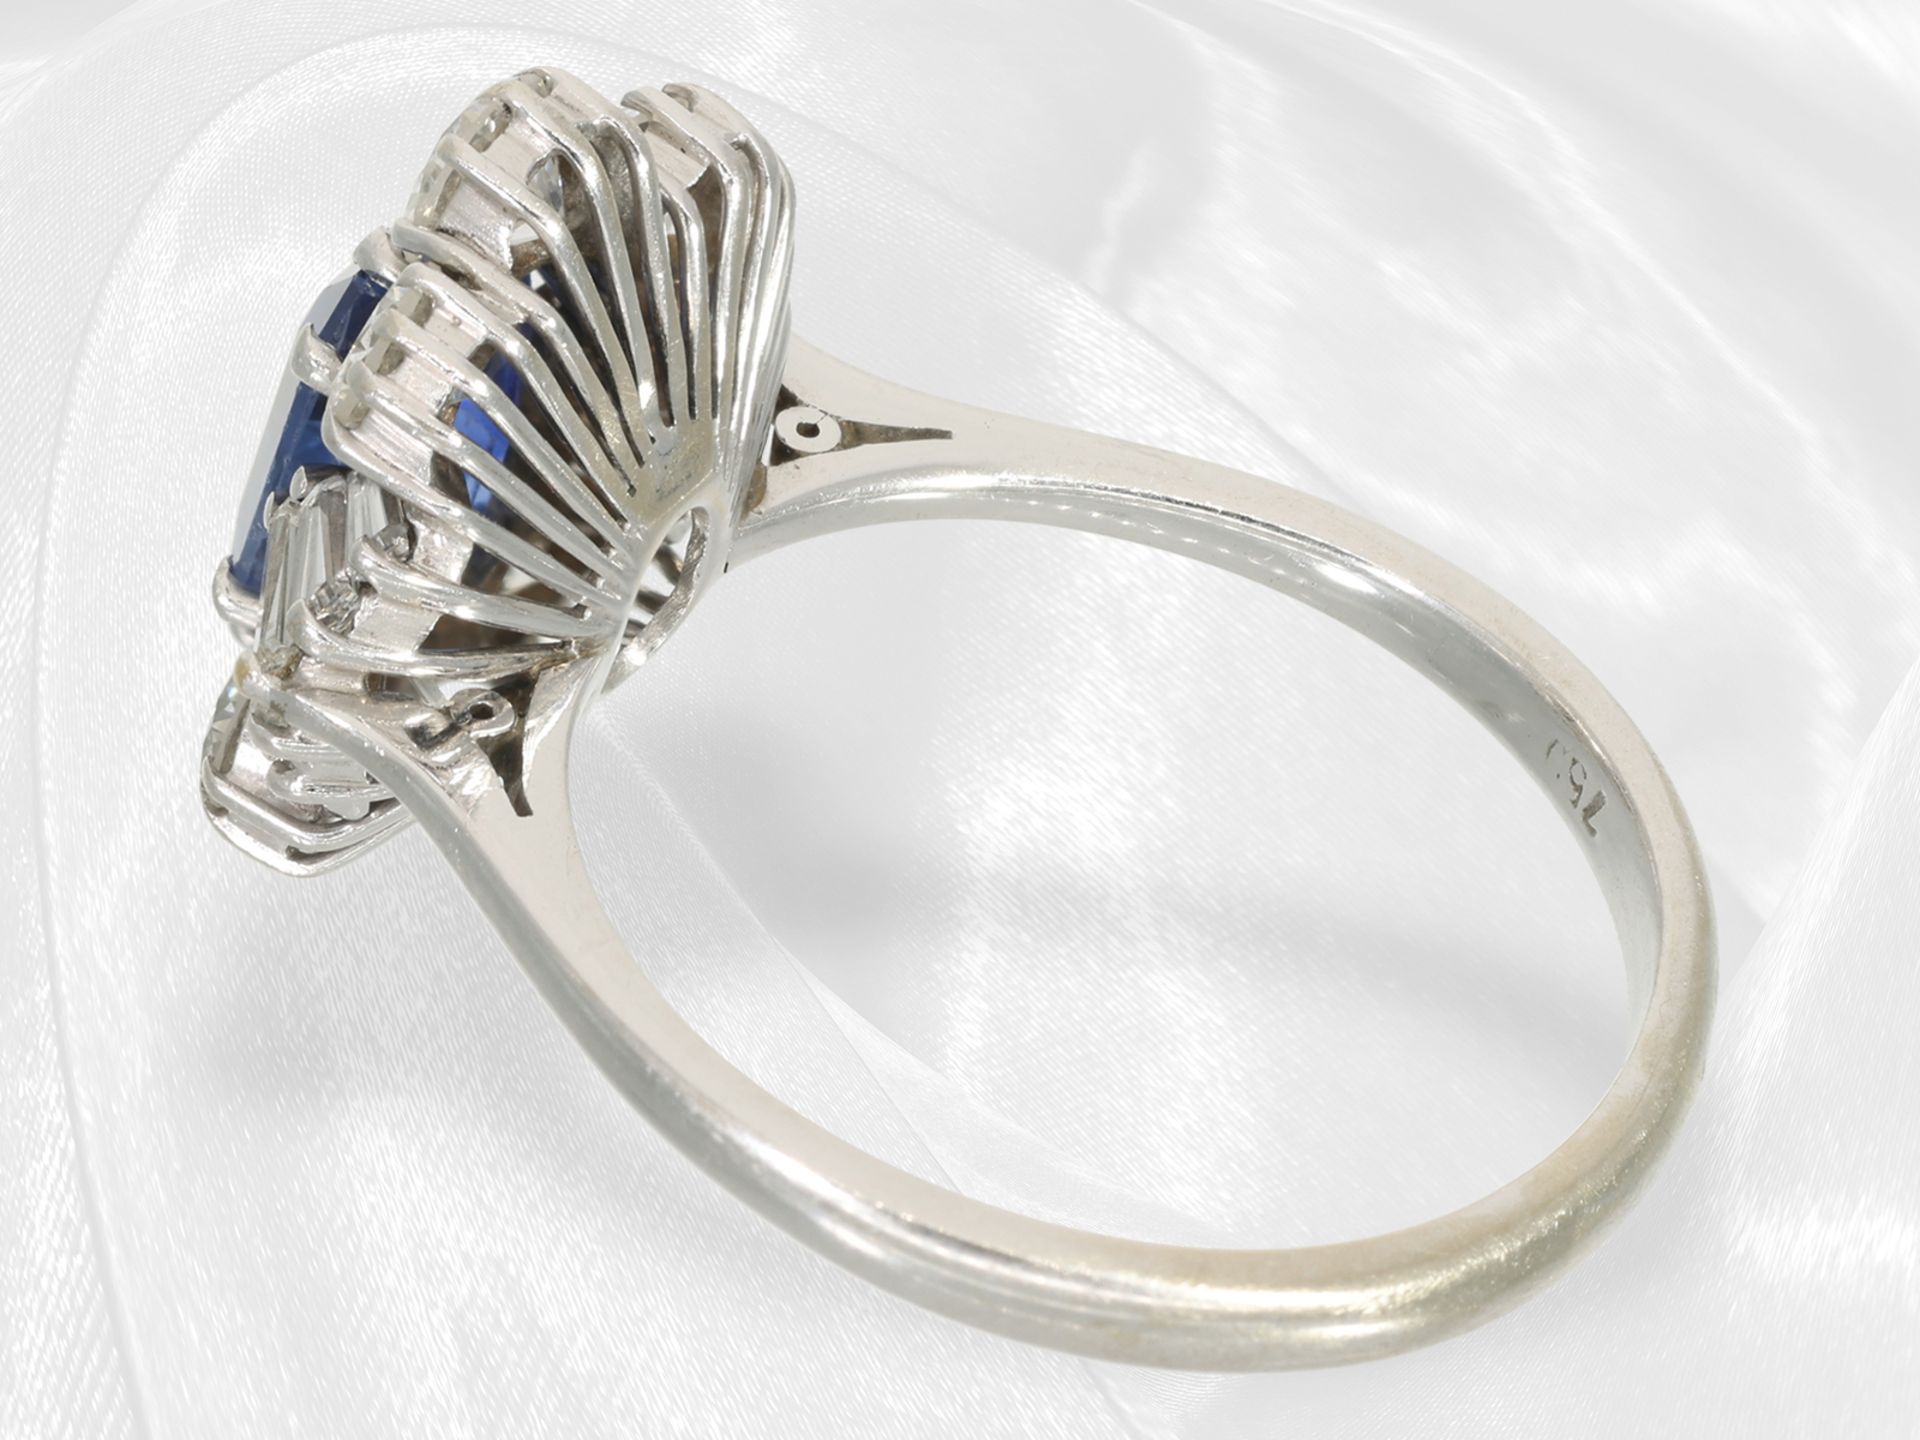 Very beautiful goldsmith's ring with fine gemstone setting, 18K white gold - Image 9 of 10